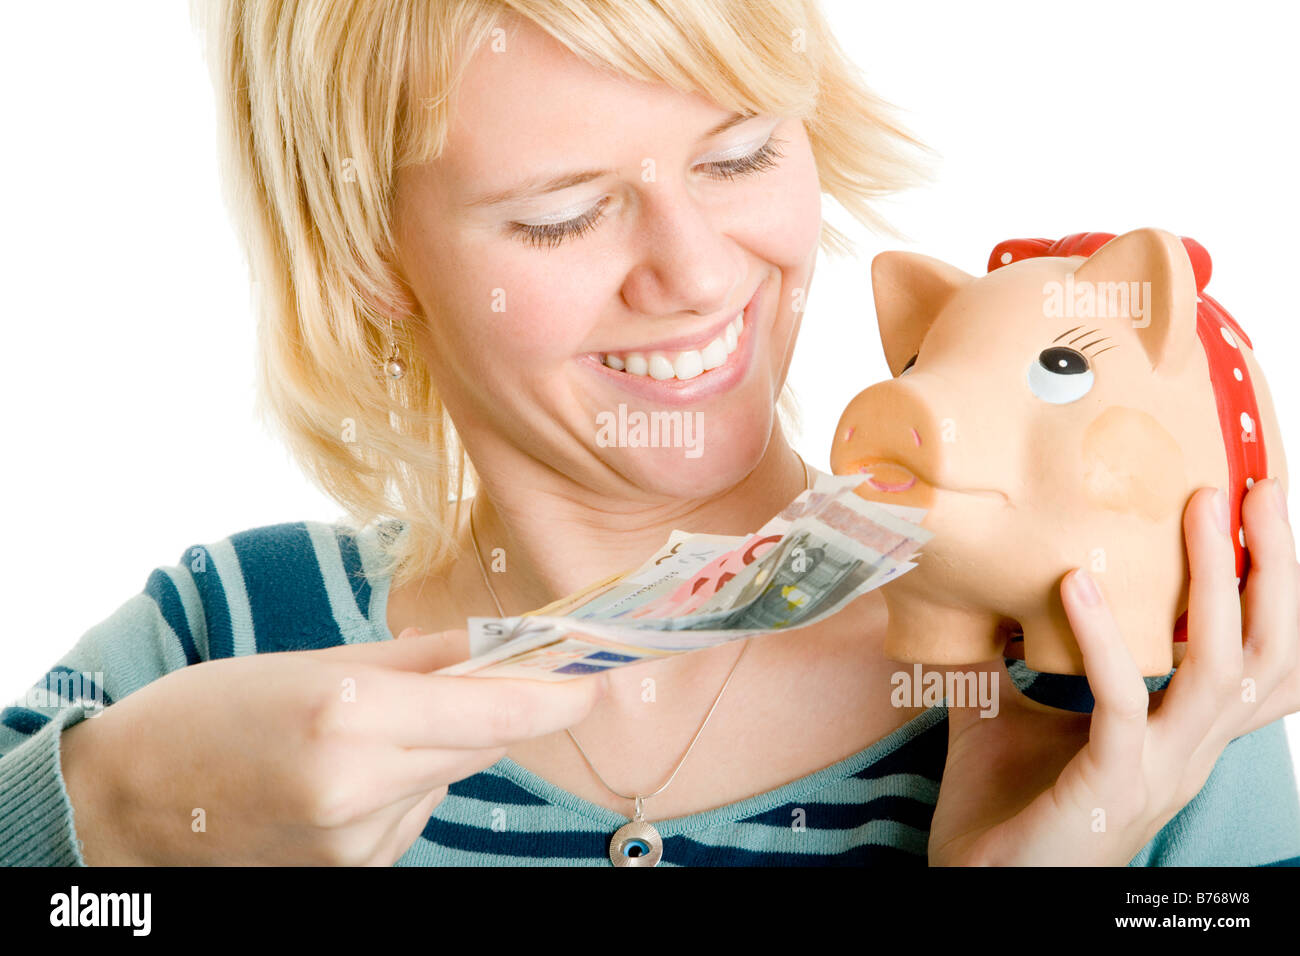 young blond girl with piggybank Stock Photo